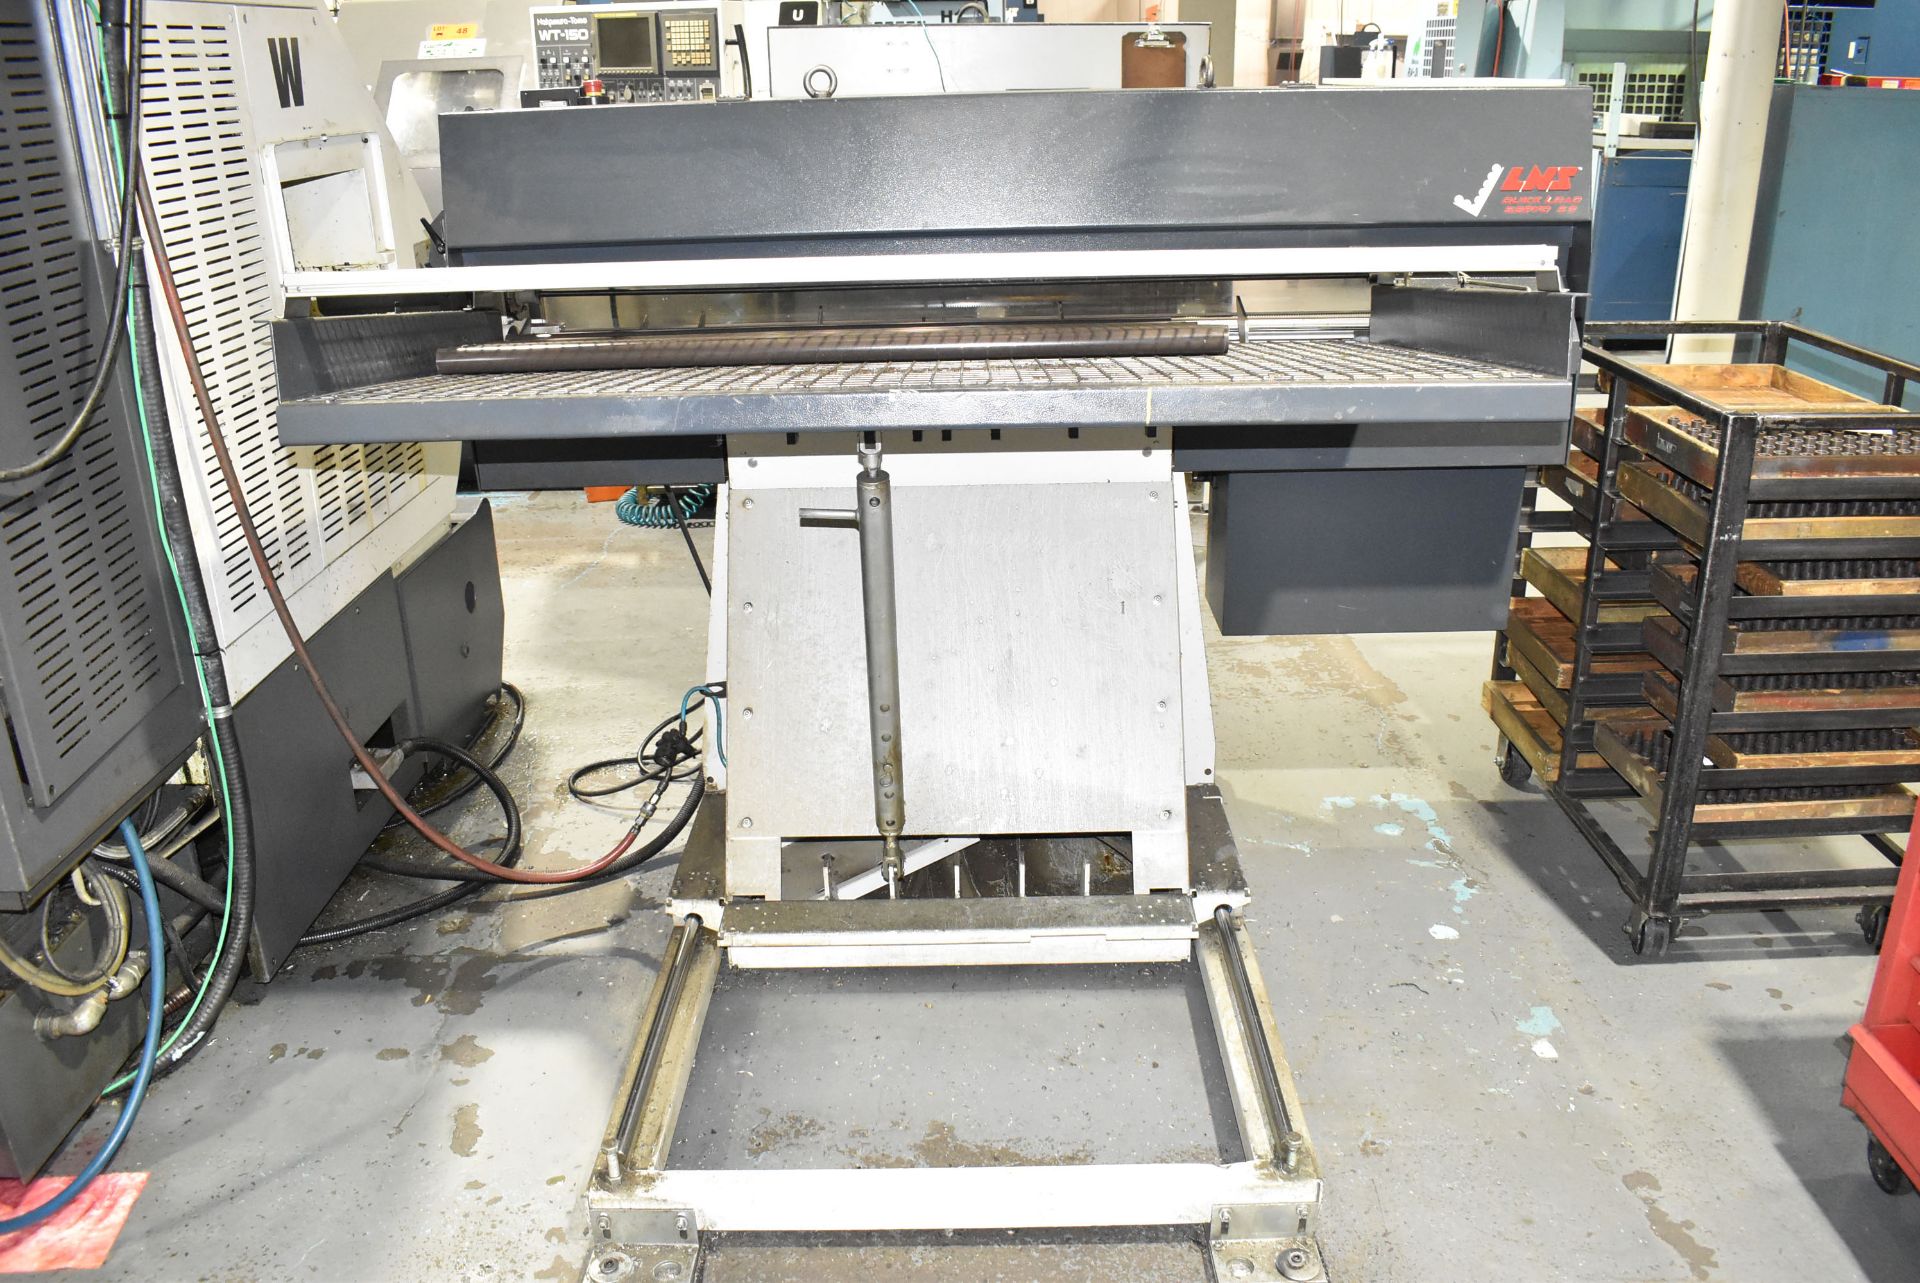 LNS Q.L. SERVO S3 BAR FEEDER, 220V/3PH/50-60HZ, S/N 304187 (CI) - Image 4 of 4